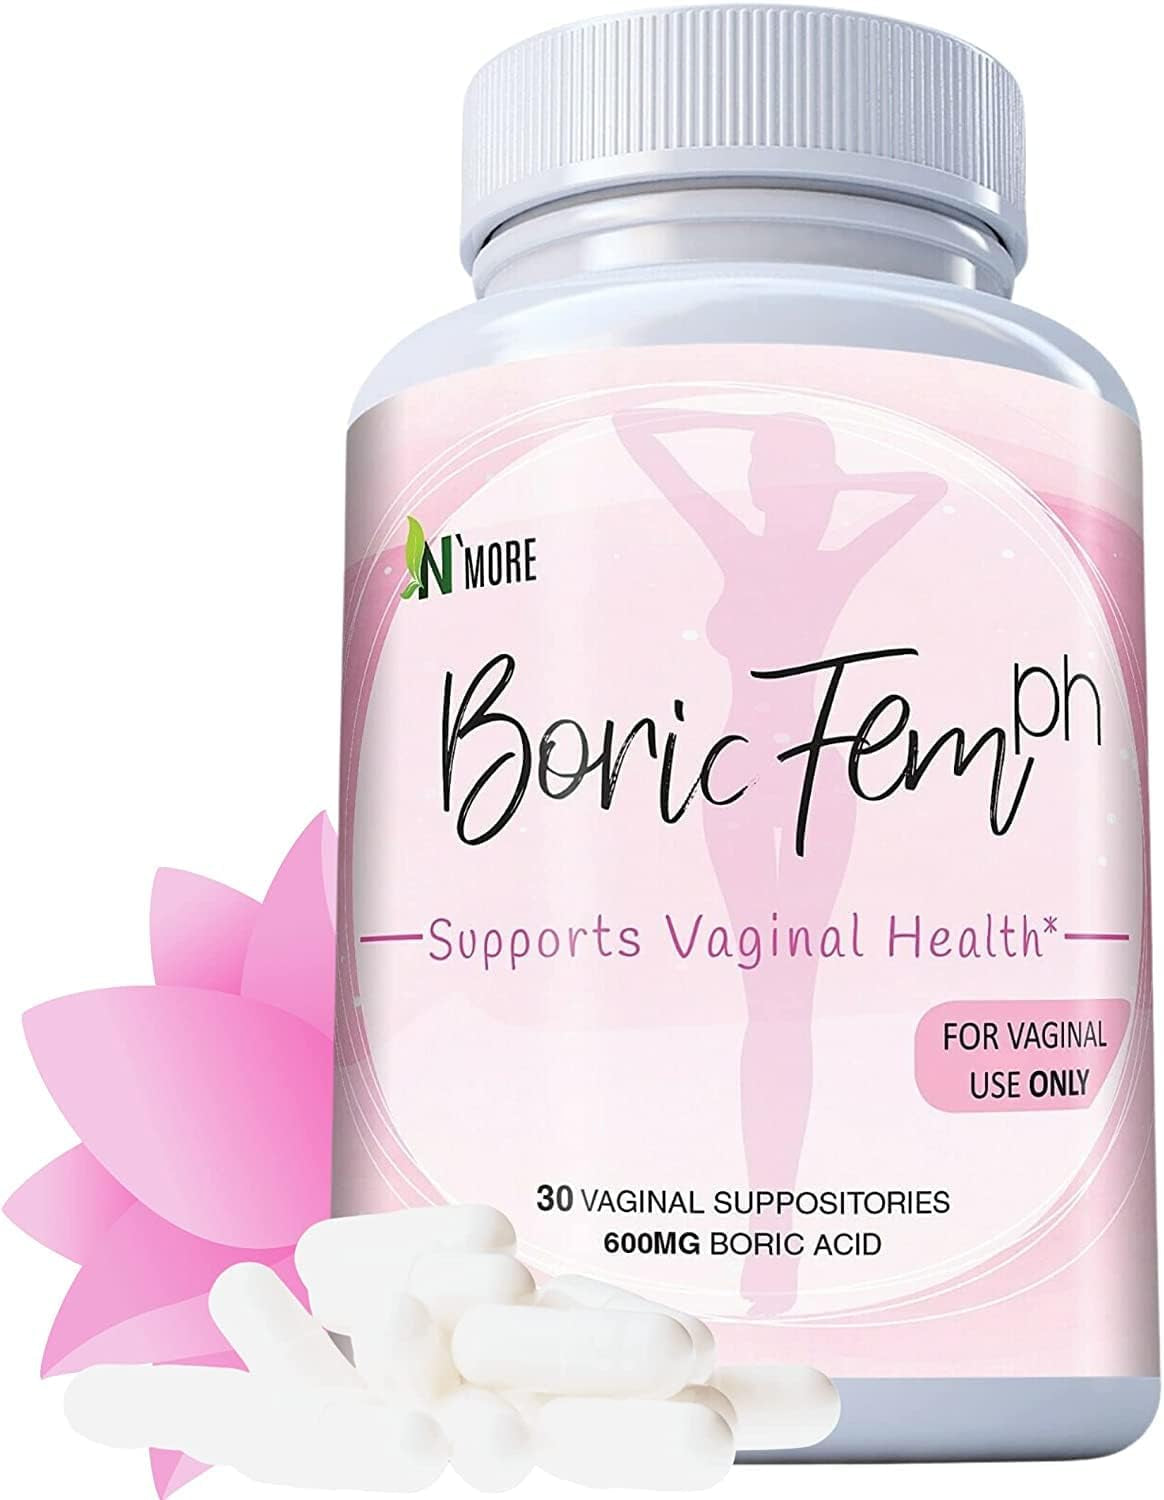 "Boricfem Vaginal Health Suppositories - 100% Pure USA-Made - 30 Servings"